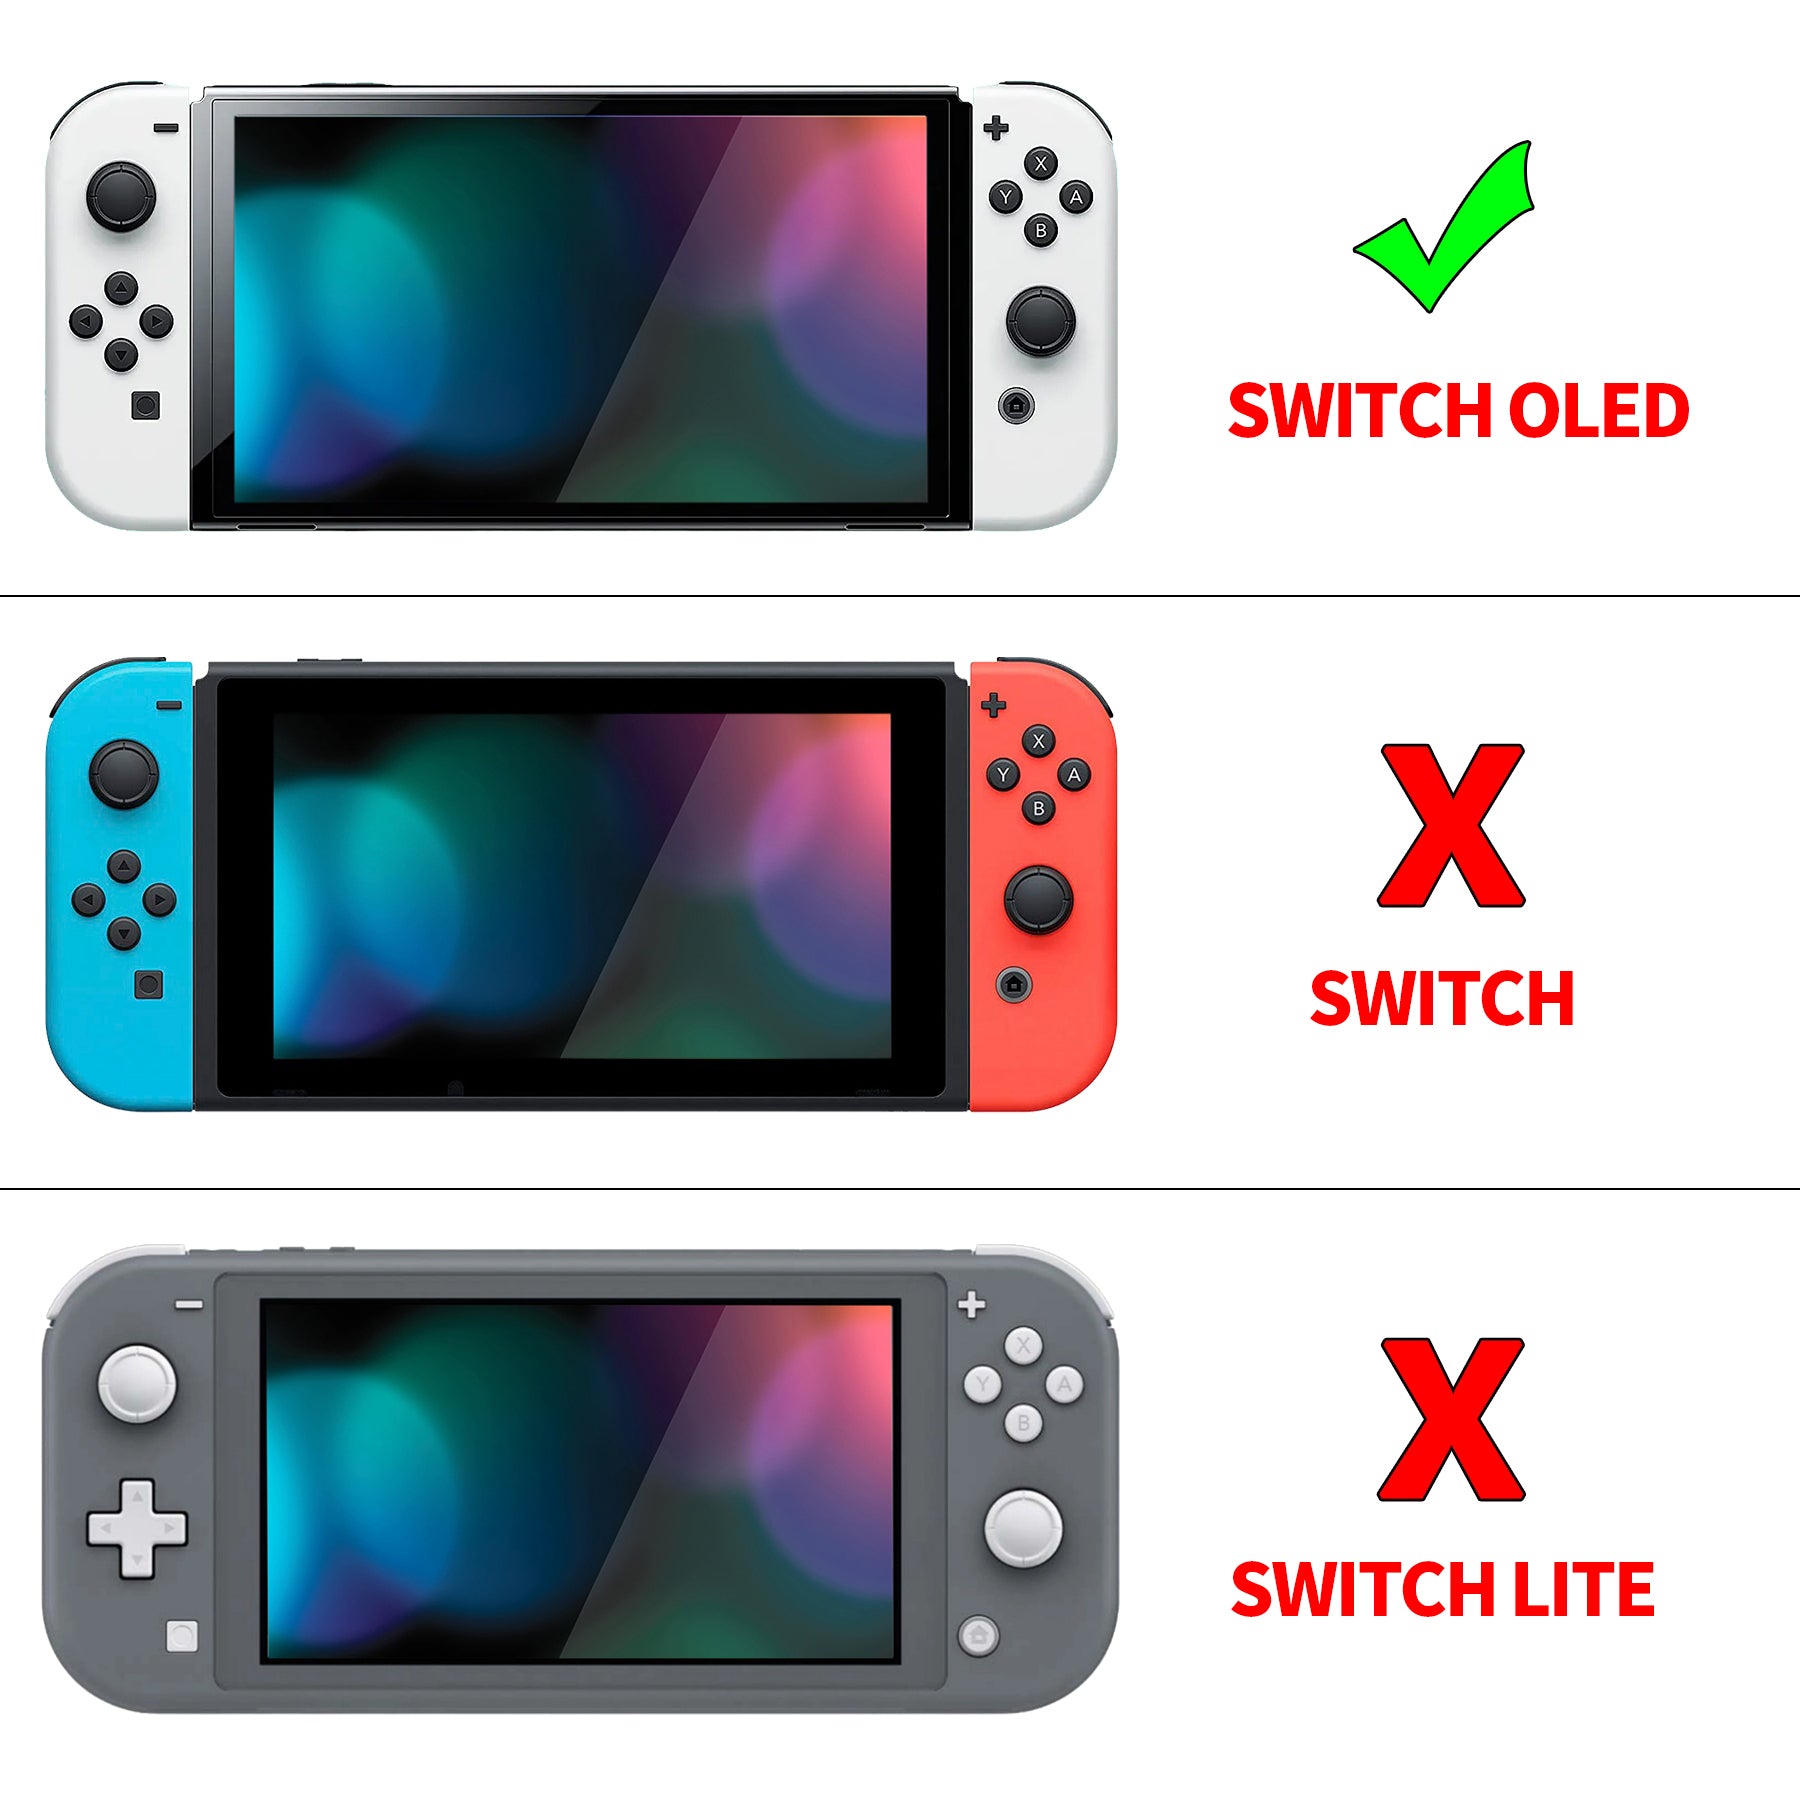 PlayVital ZealProtect Soft Protective Case for Switch OLED, Flexible Protector Joycon Grip Cover for Switch OLED with Thumb Grip Caps & ABXY Direction Button Caps - Totem of Kingdom - XSOYV6028 playvital